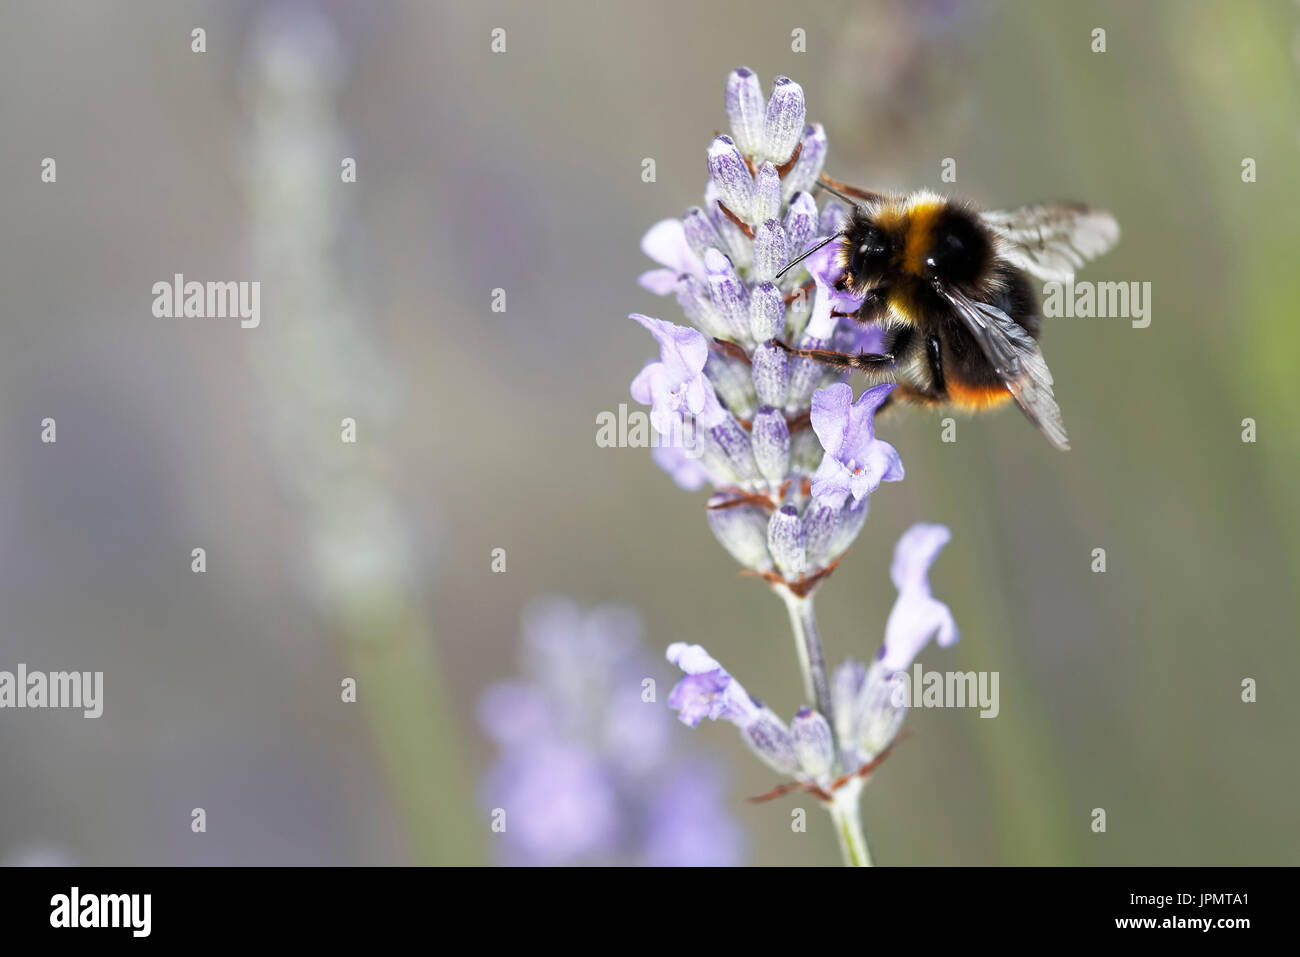 White tailed Bumblebee collecting nectar from lavender flowers. Stock Photo